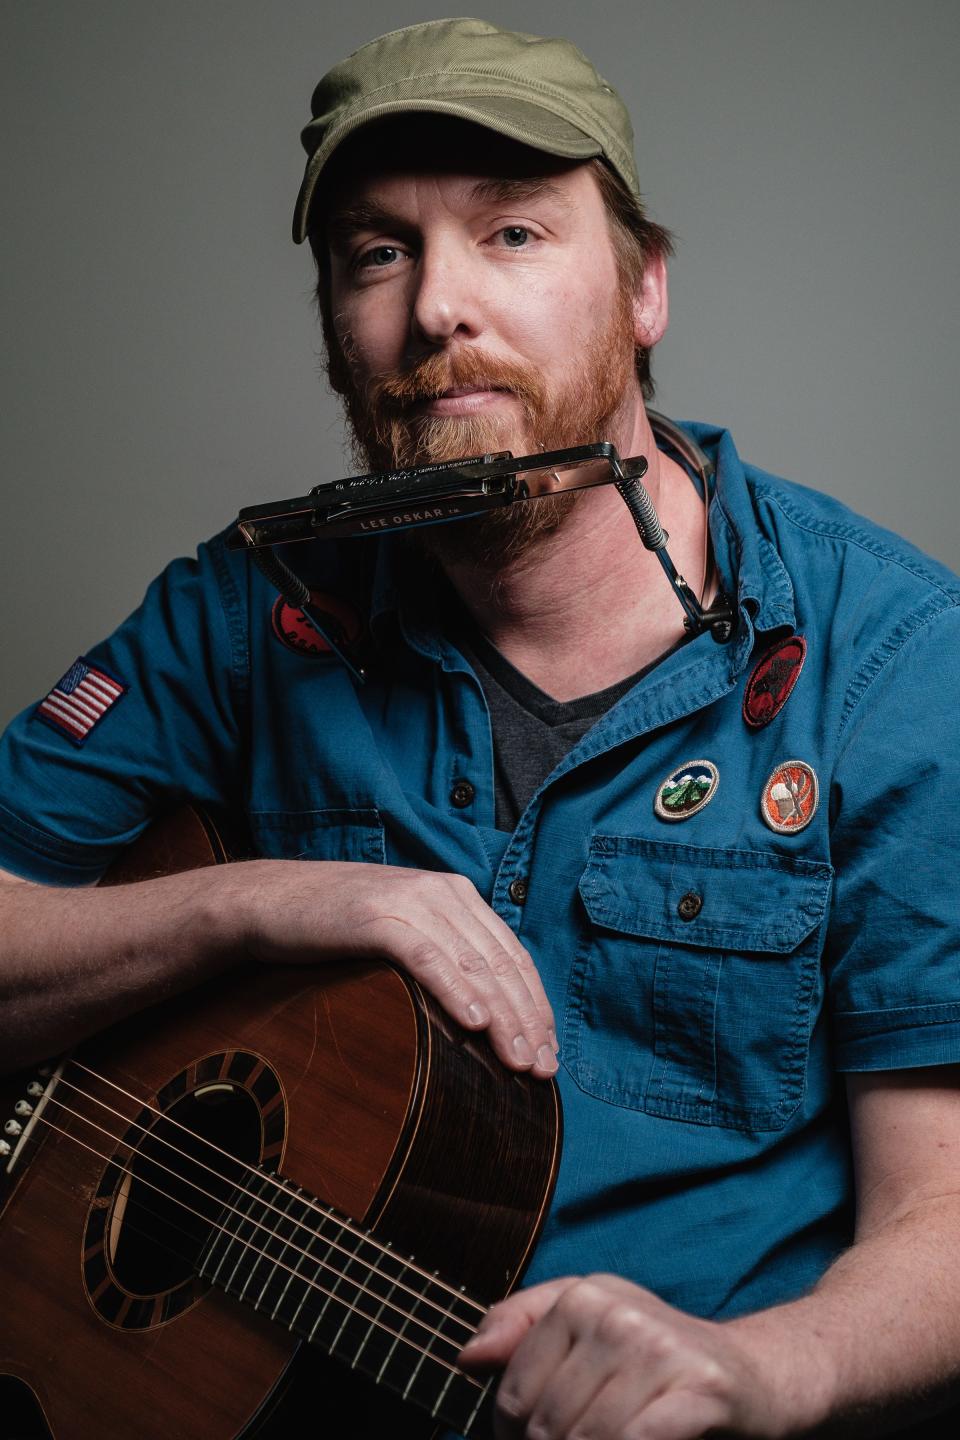 Josh Compton is a singer, songwriter, and teacher in Tuscarawas County.